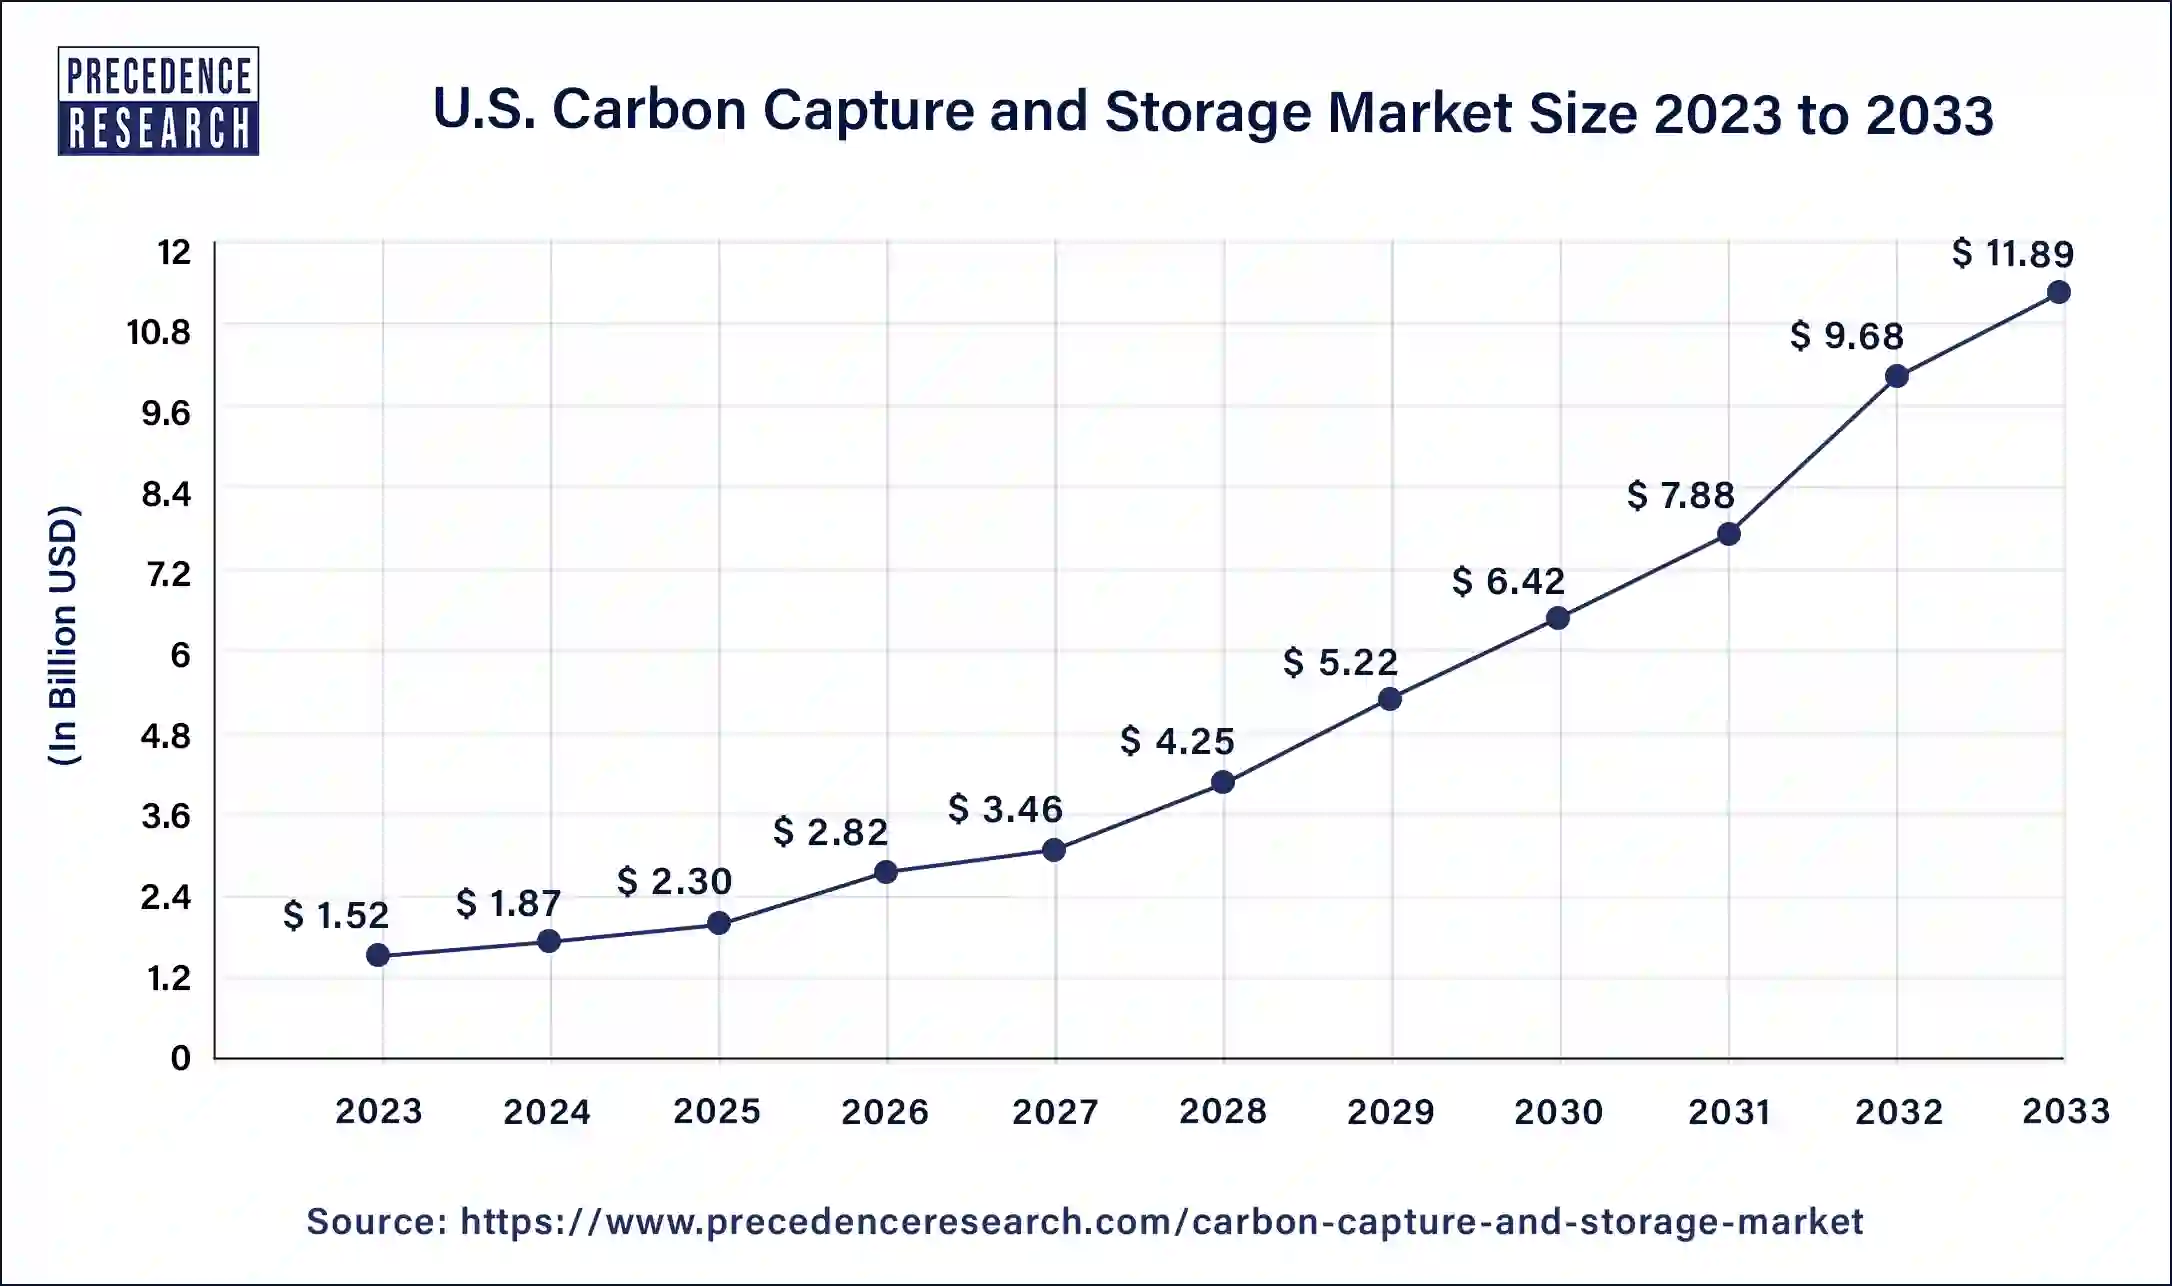 U.S. Carbon Capture and Storage Market Size 2024 to 2033